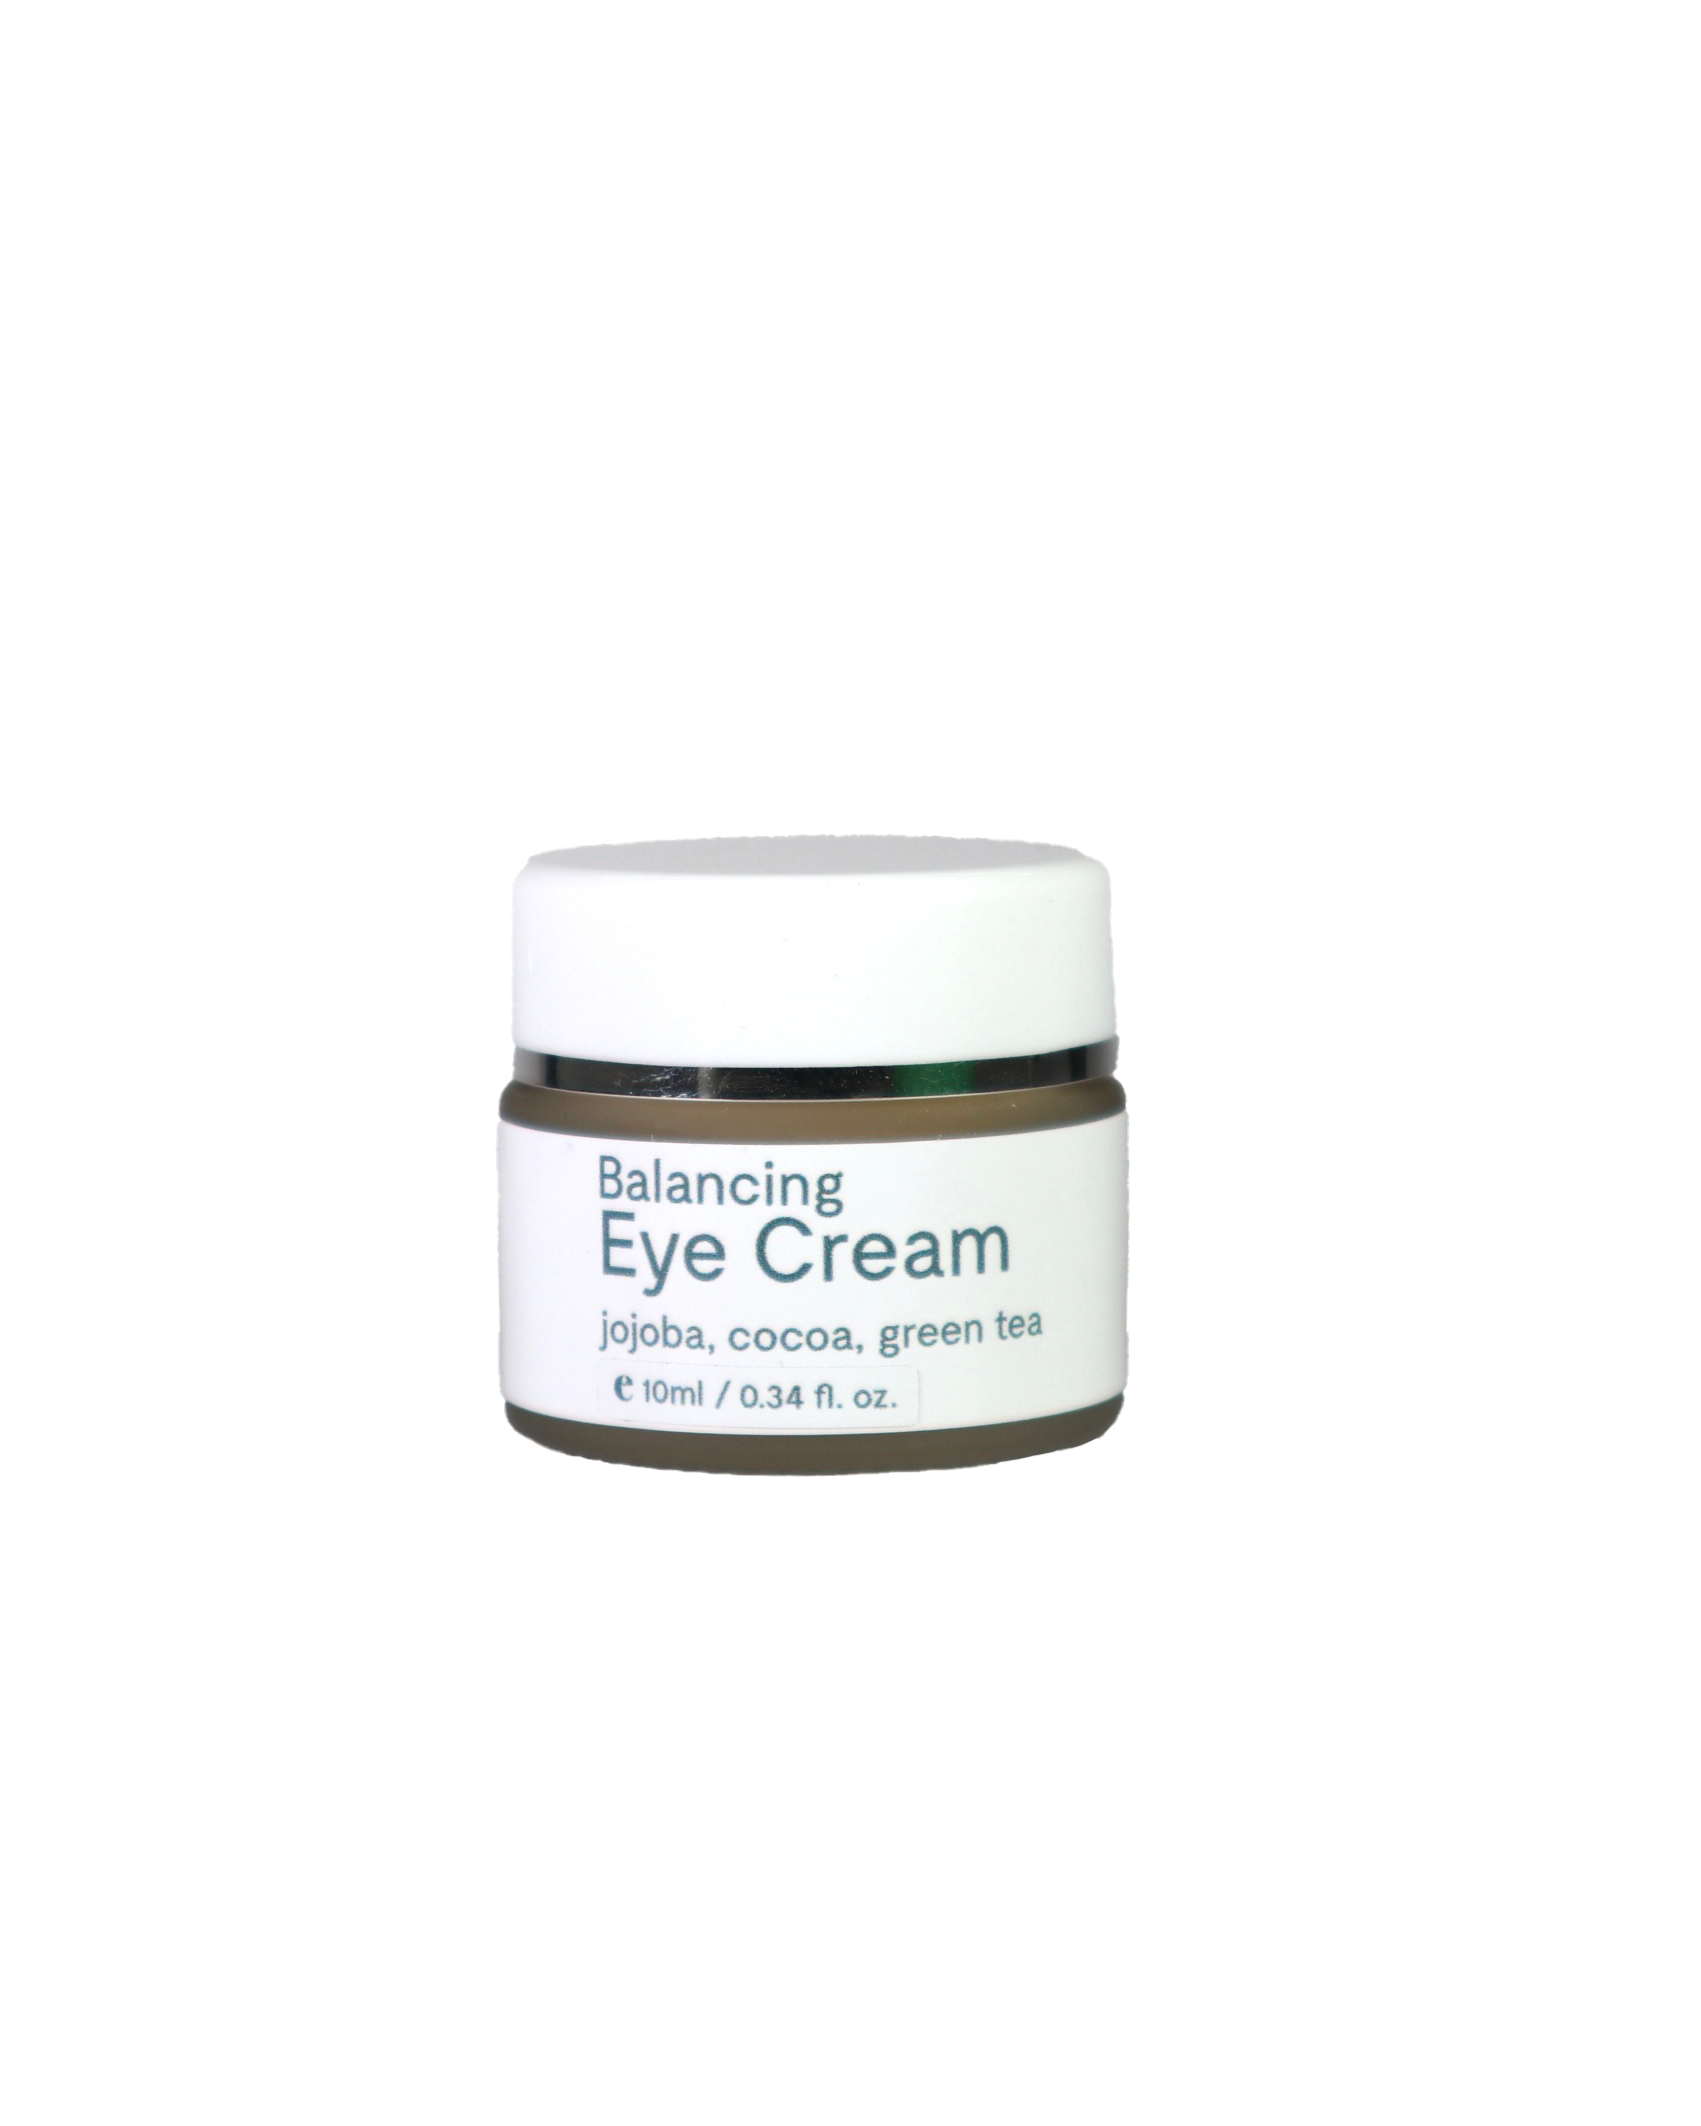 Azurlis™ Balancing Eye Cream 30ml is an extremely light yet deeply nourishing and protective daily treat. Suitable for all skin types including sensitive skin, to protect against premature ageing.